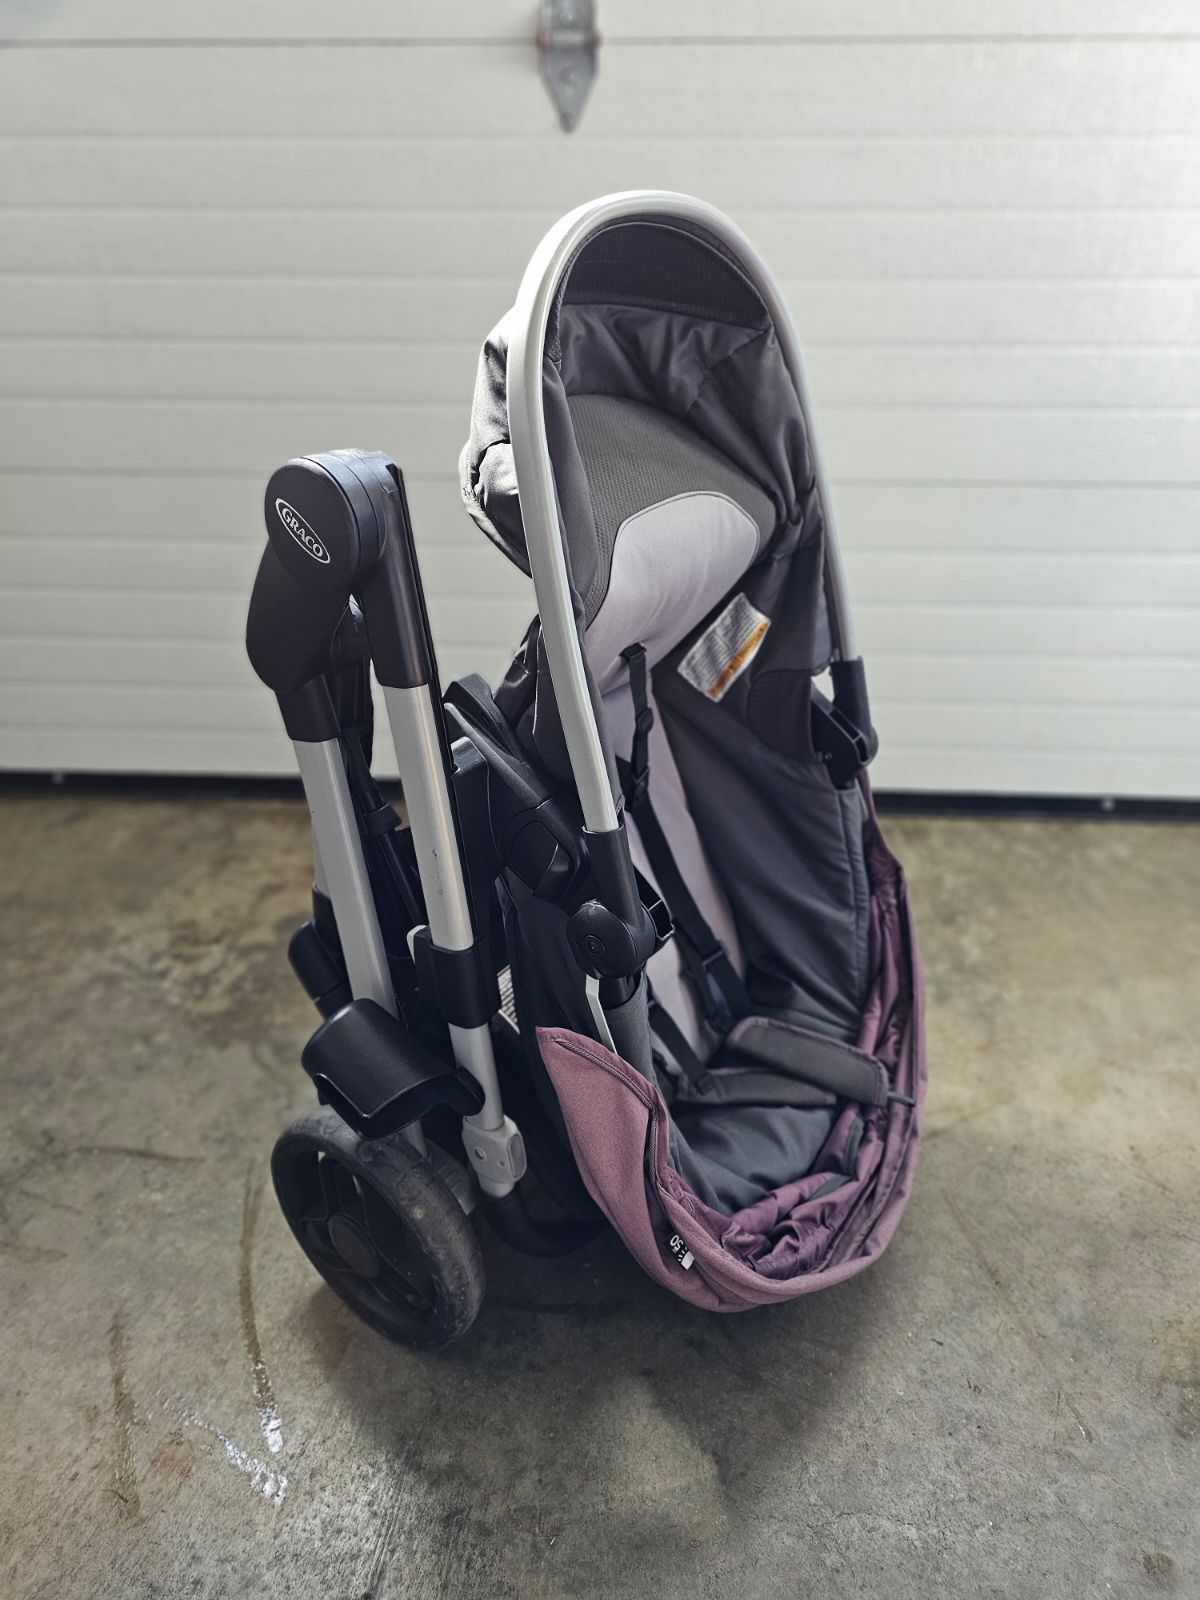 Graco Stroller With Car Seat Combo 150obo